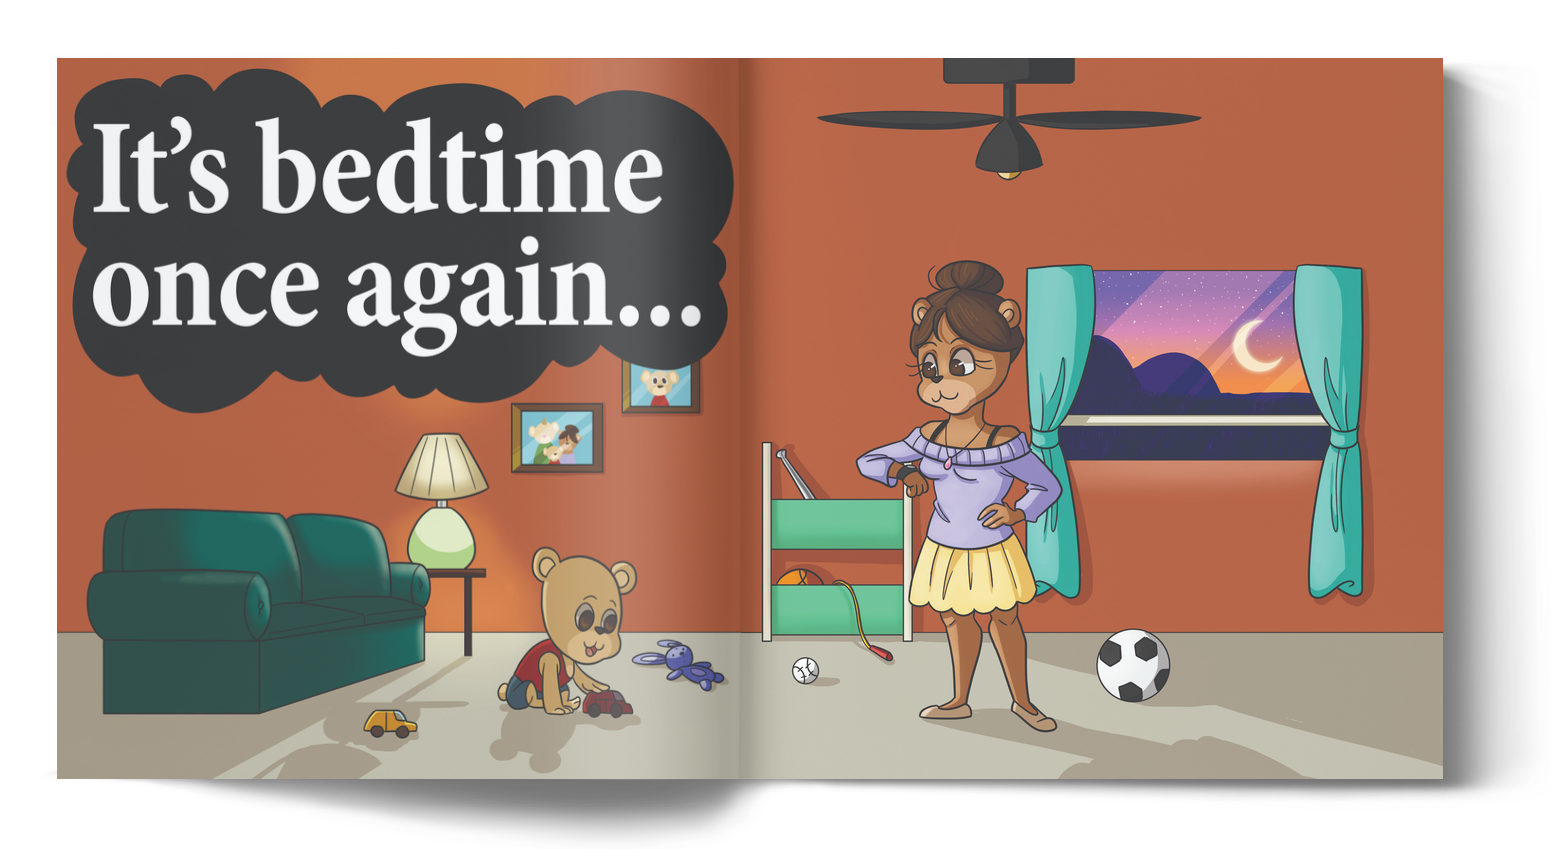 Bedtime Sleep time Nighttime Dream time is a sweet bedtime story that encourages routine keeping, gratitude, imagination and aspiration! Large Print, Reverse Contrast